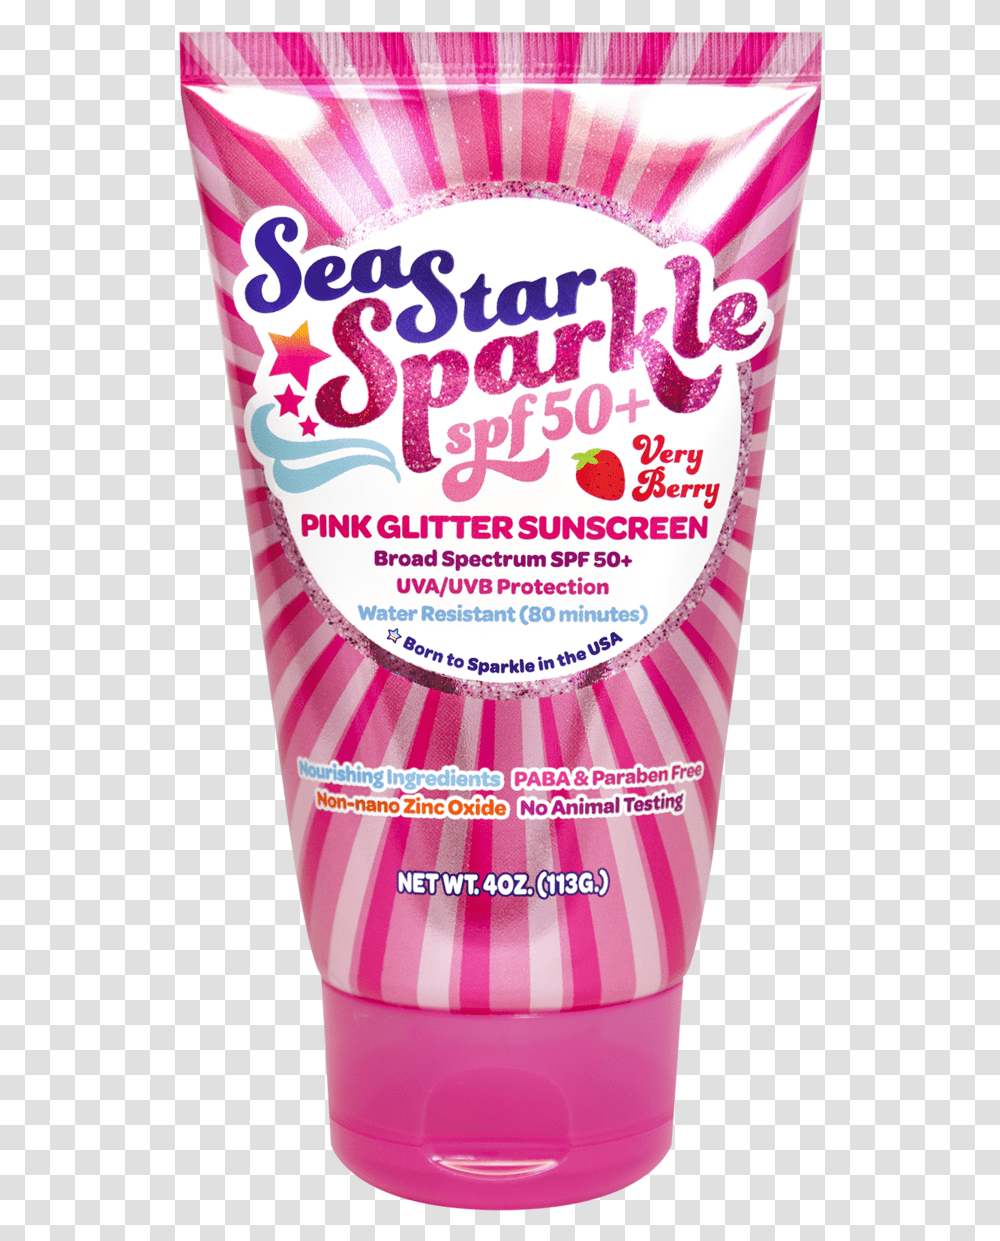 Seastar Sparkle Spf50 Very Berry With Pink Glitter - 4 Oz Star, Label, Text, Bottle, Beer Transparent Png